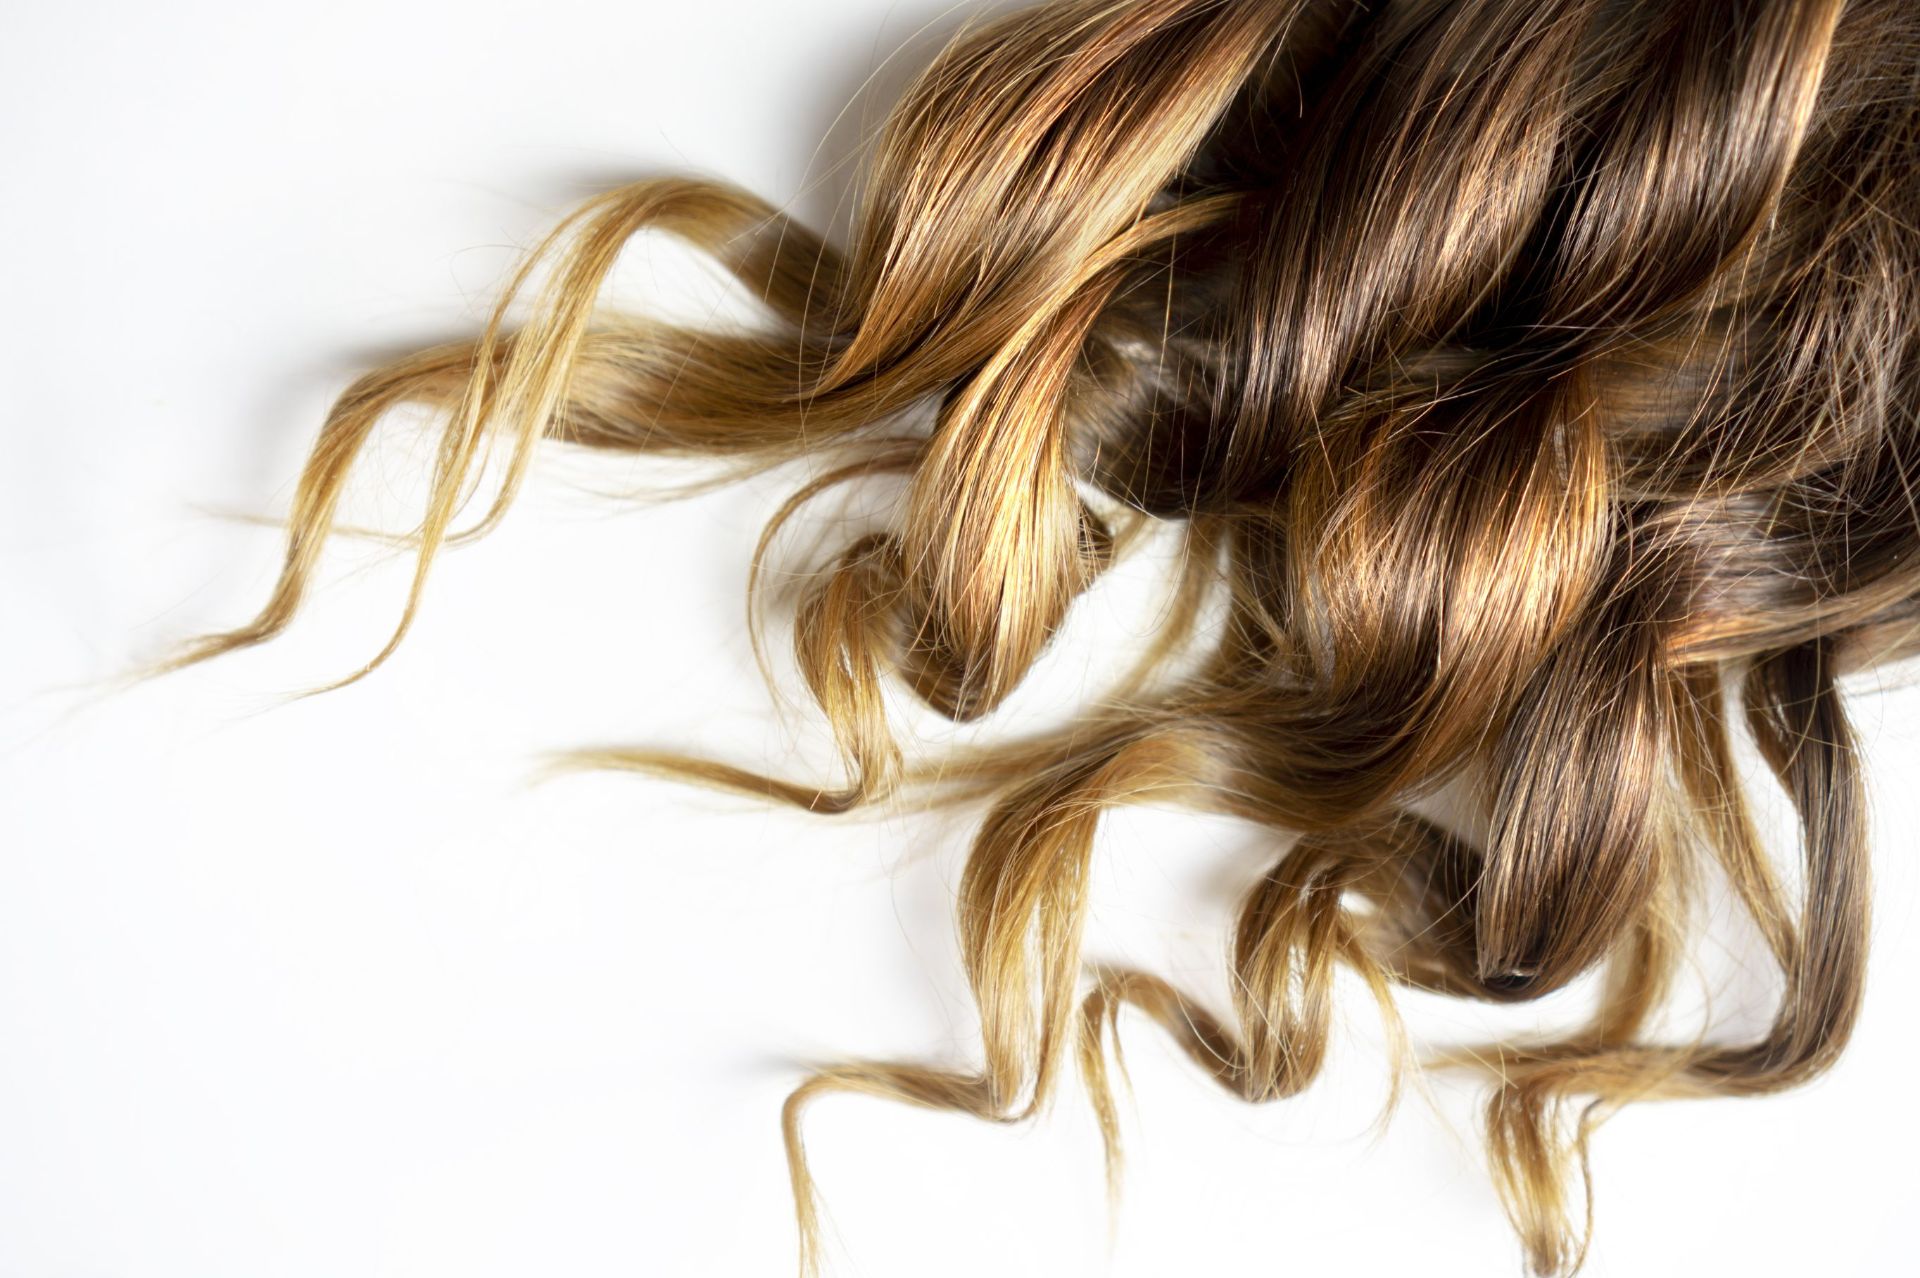 Strands of curly blonde hair on a white background.